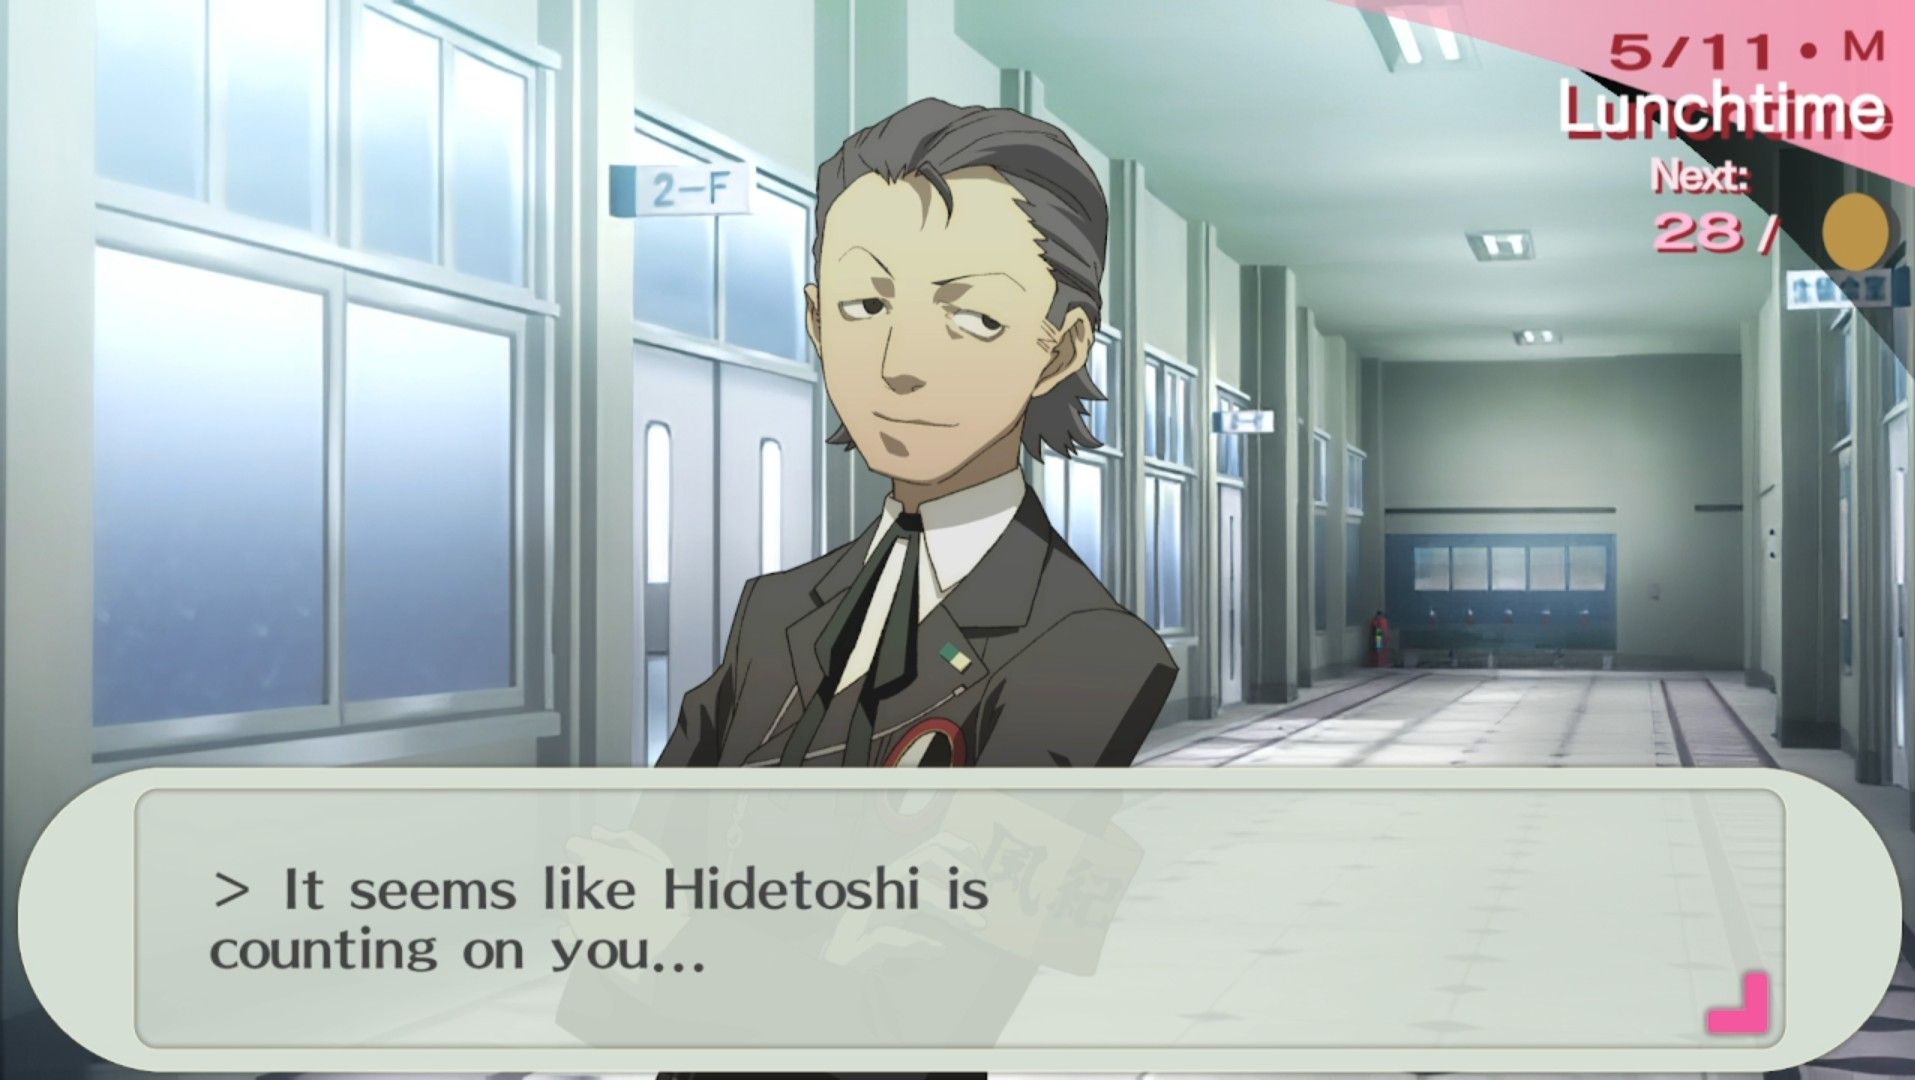 hidetoshi odagiri counting on the protagonist to come to student council in persona 3 portable